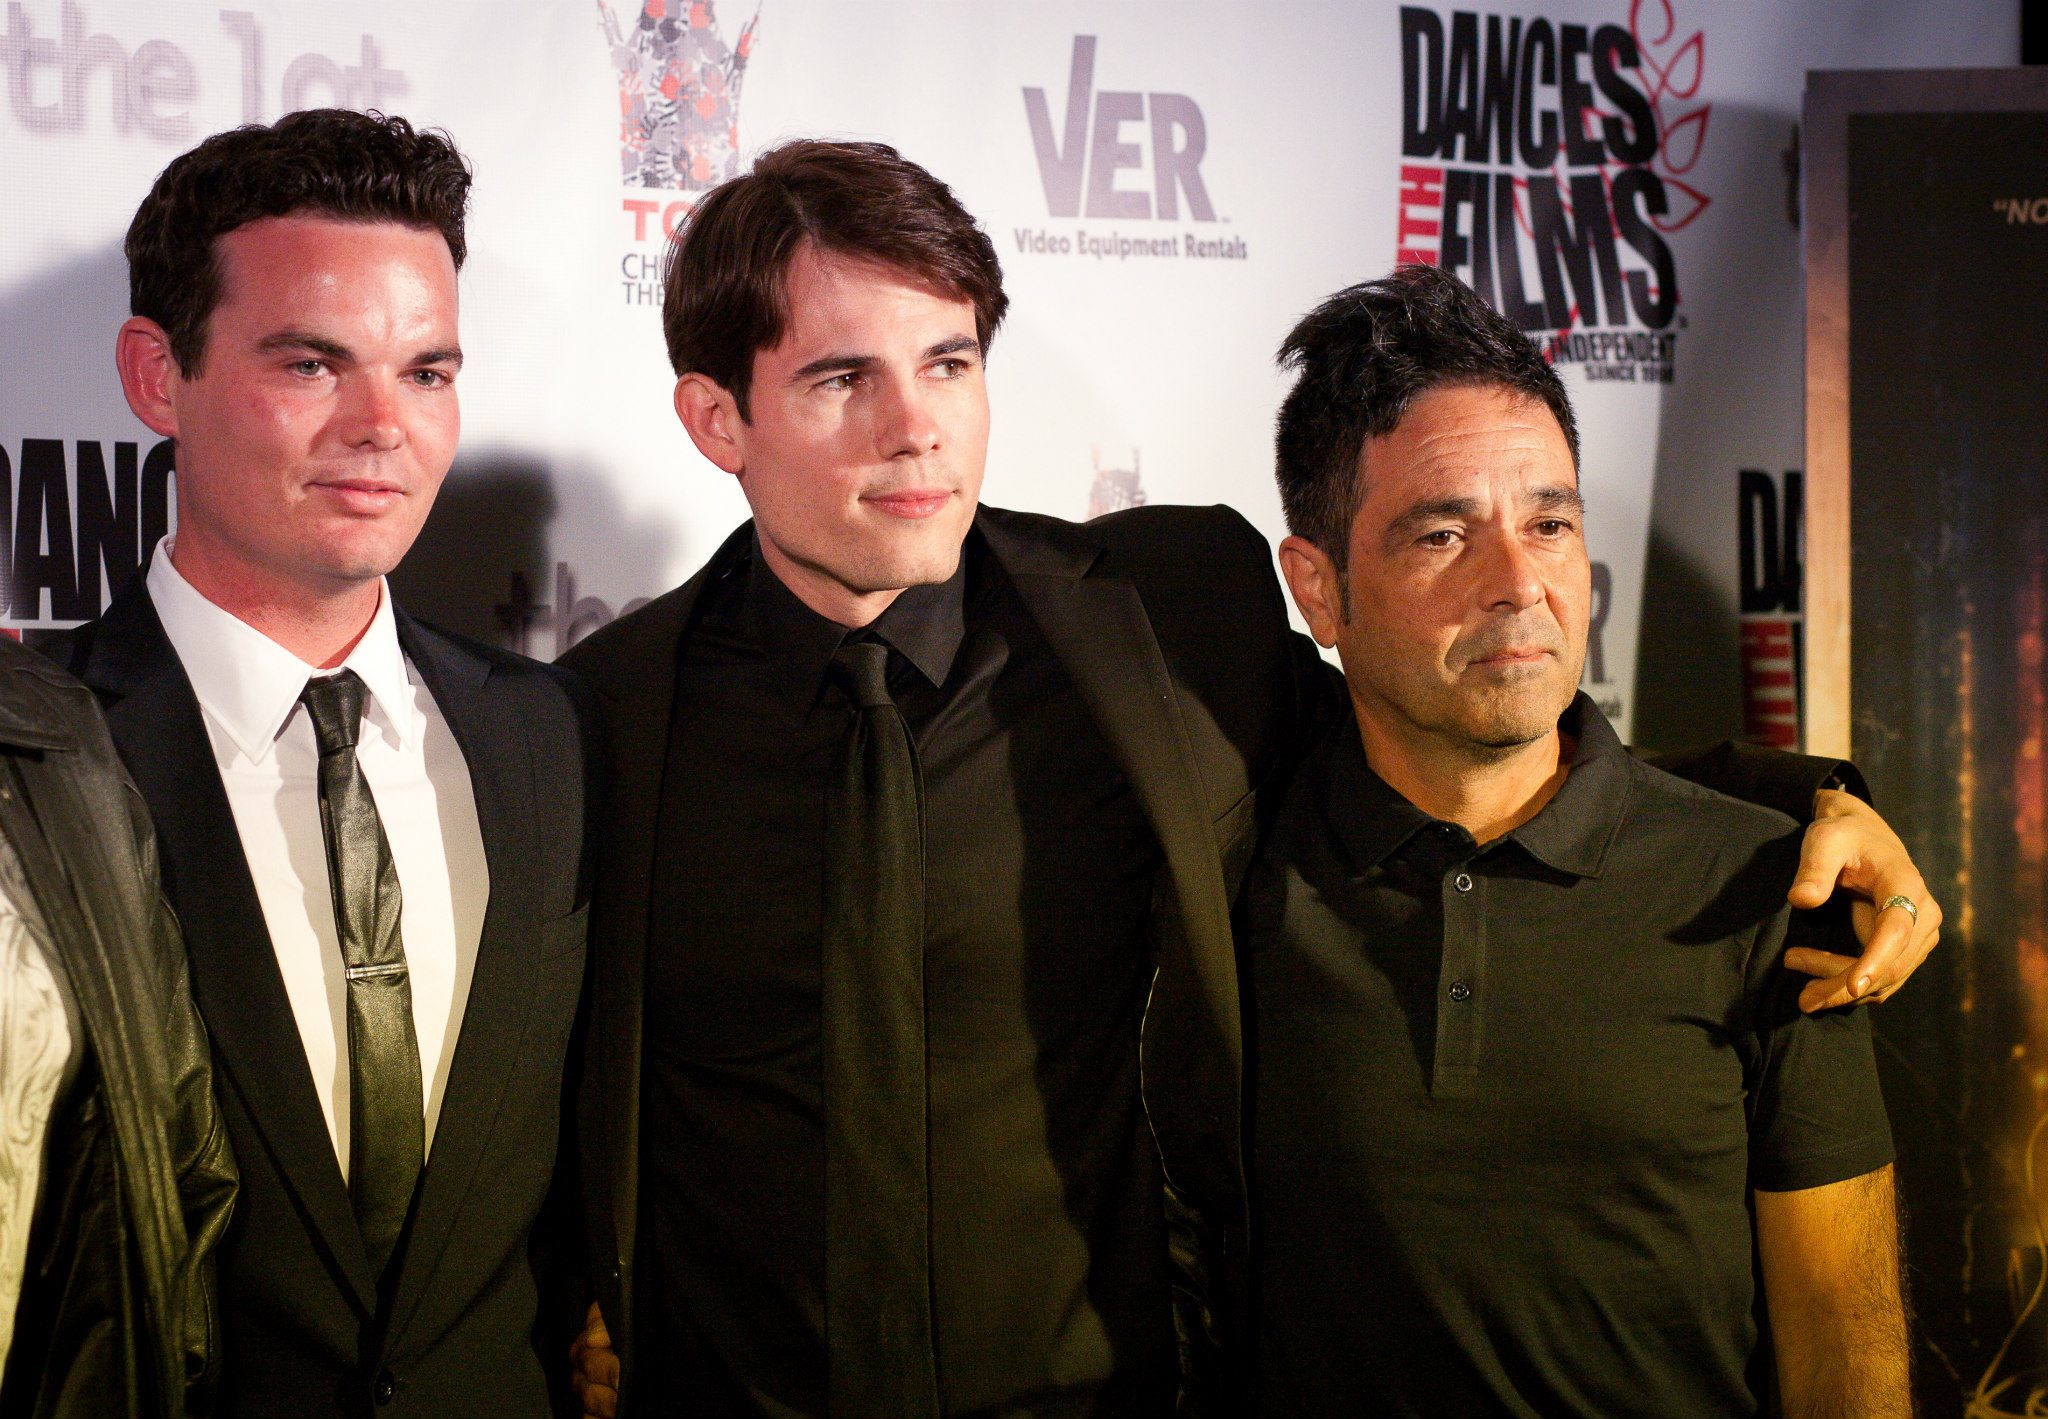 Chandler Rylko, Samuel Nolan and Kevin Pinassi at the premiere of The Toy Soldiers